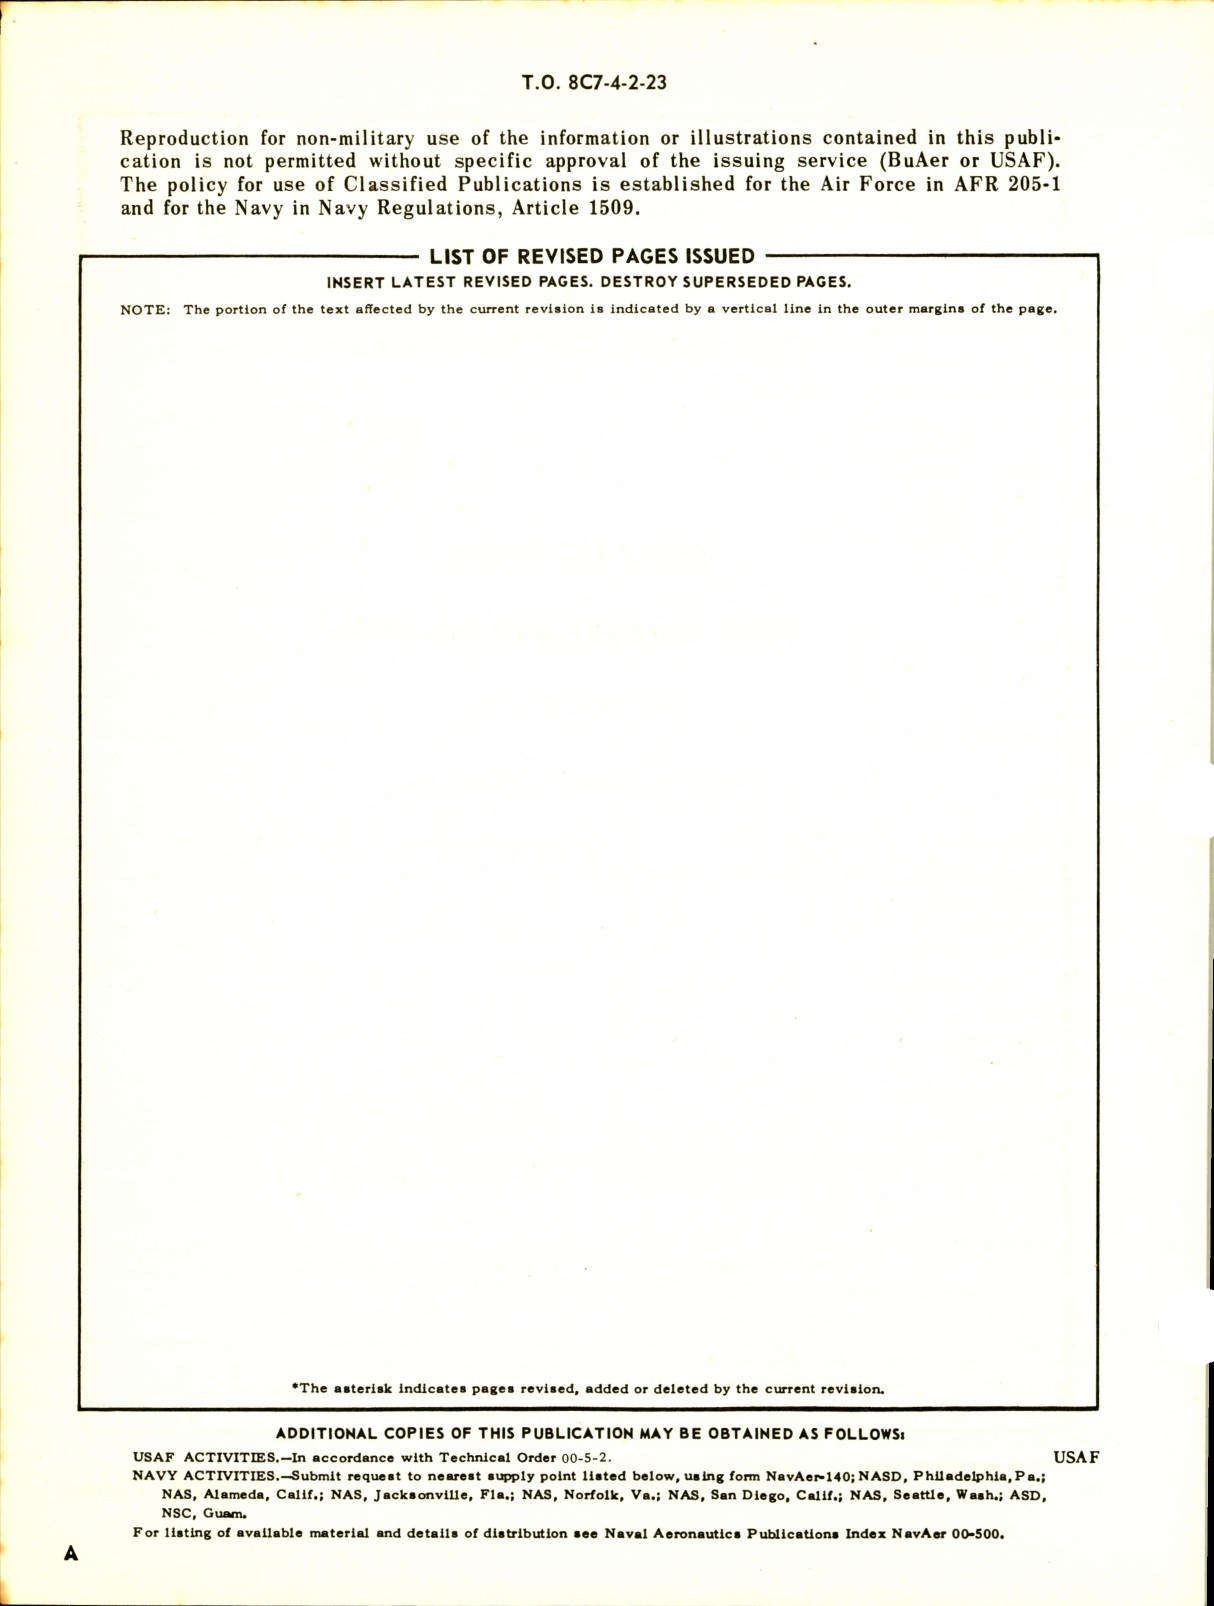 Sample page 2 from AirCorps Library document: Instructions for Inverters Types MG-149F & MG-146H